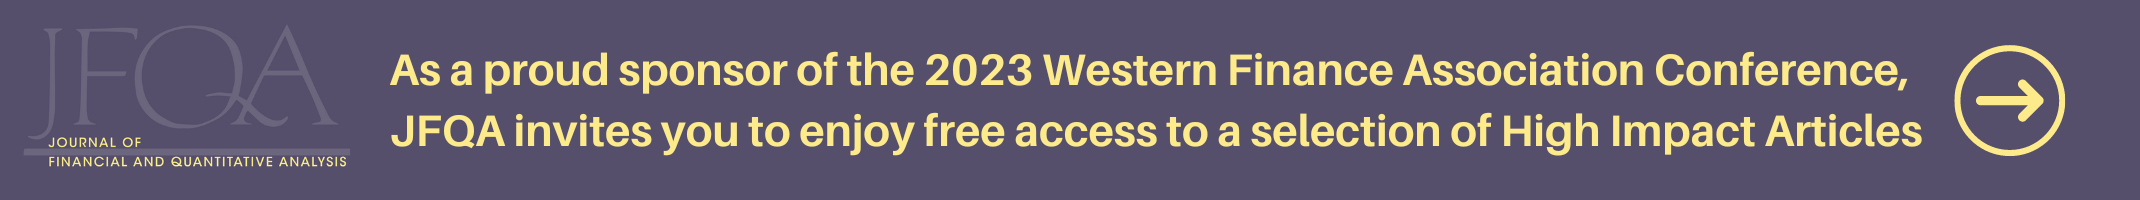 As a proud sponsor of WFA 2023, JFQA invites you to enjoy free access to high impact articles